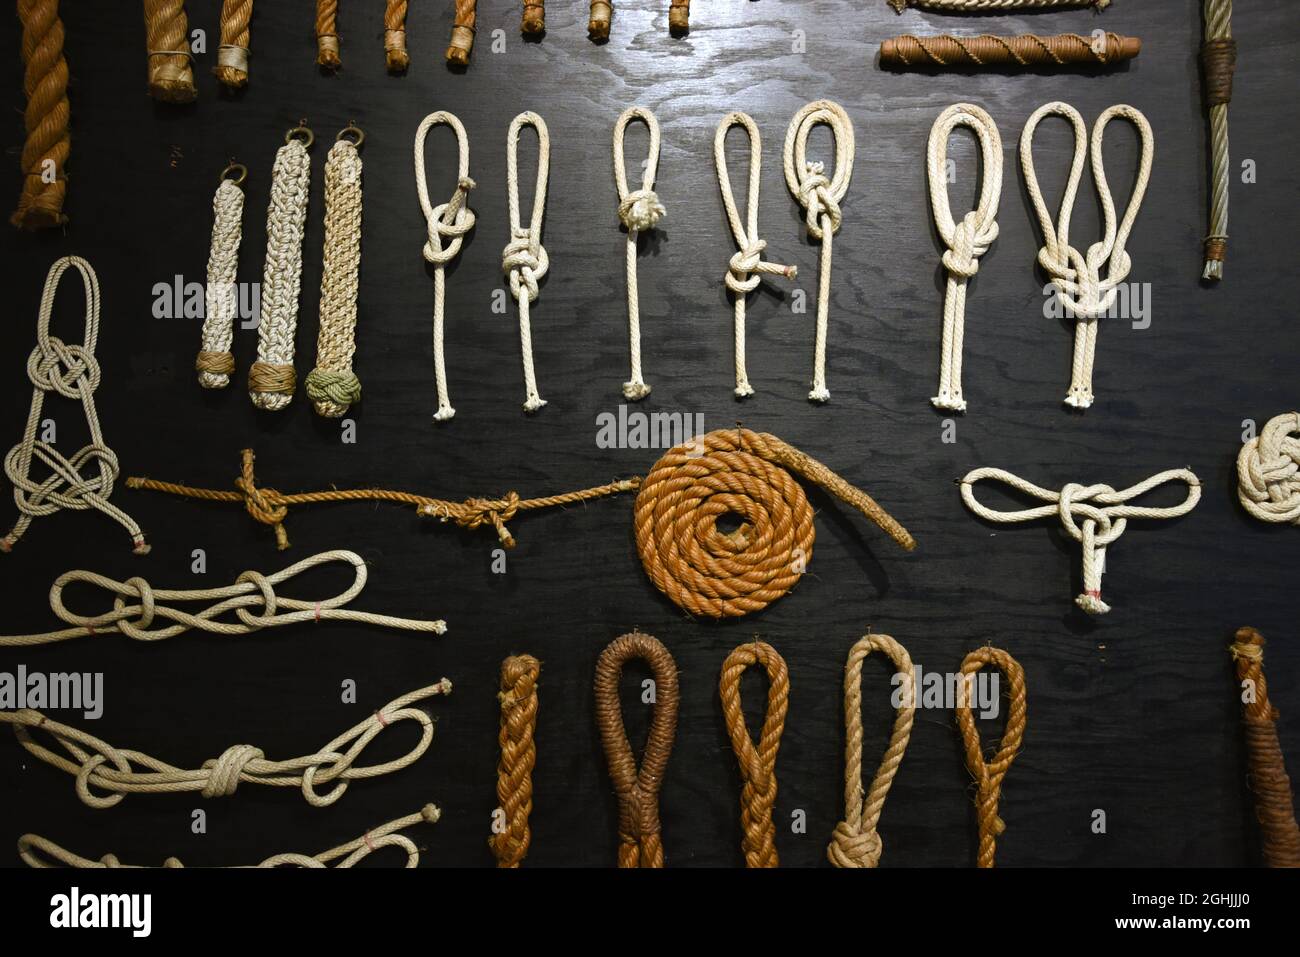 A variety of examples of types of knots in rope are displayed on a knot board at the Maritime Museum of British Columbia in Victoira, BC, Canada Stock Photo